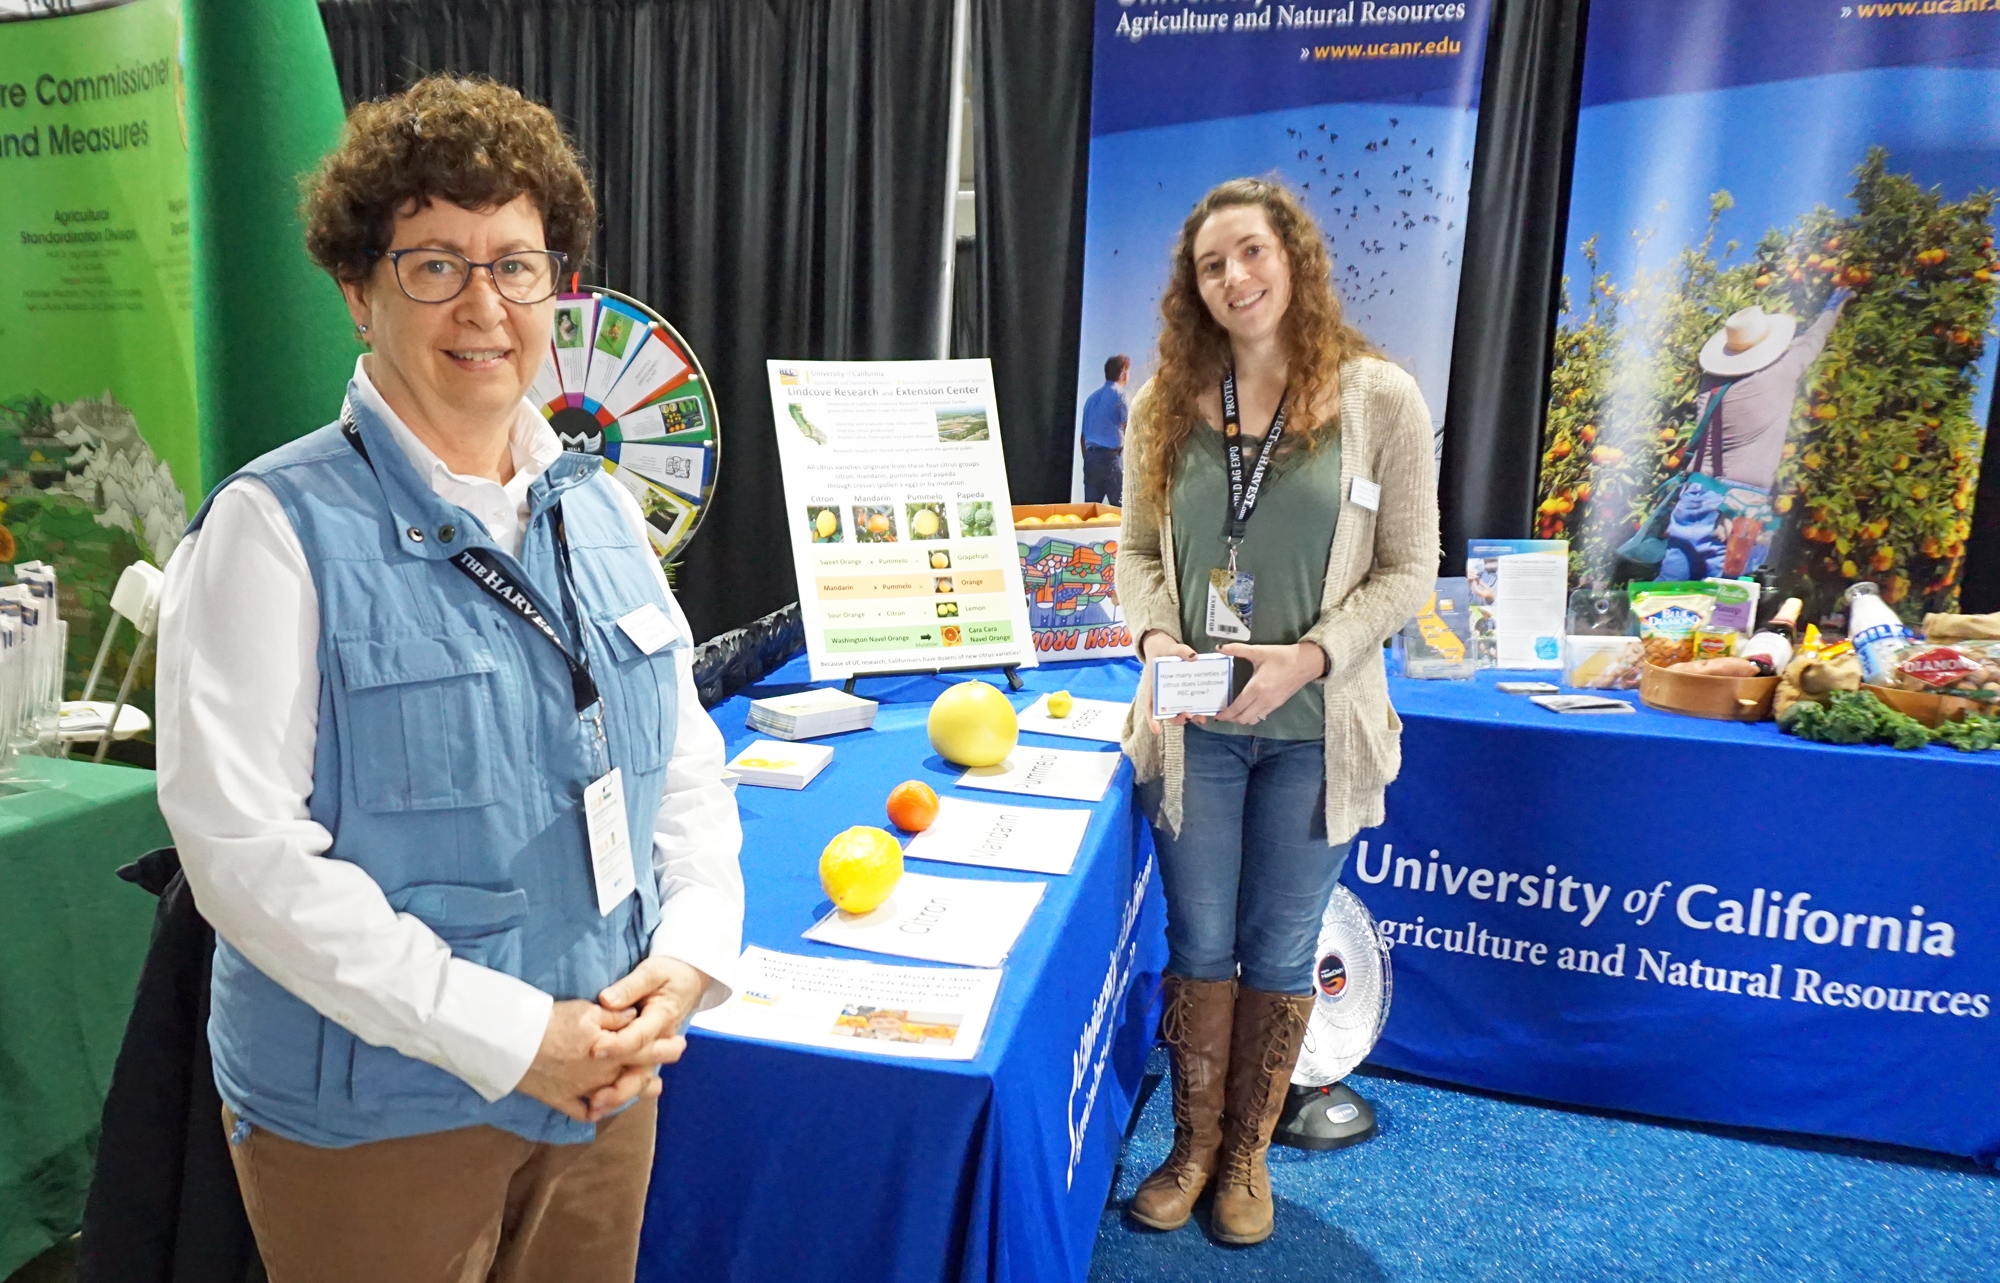 Uc Anr Shares Its Programs And Services At The World Ag Expo Anr Employee News Anr Blogs